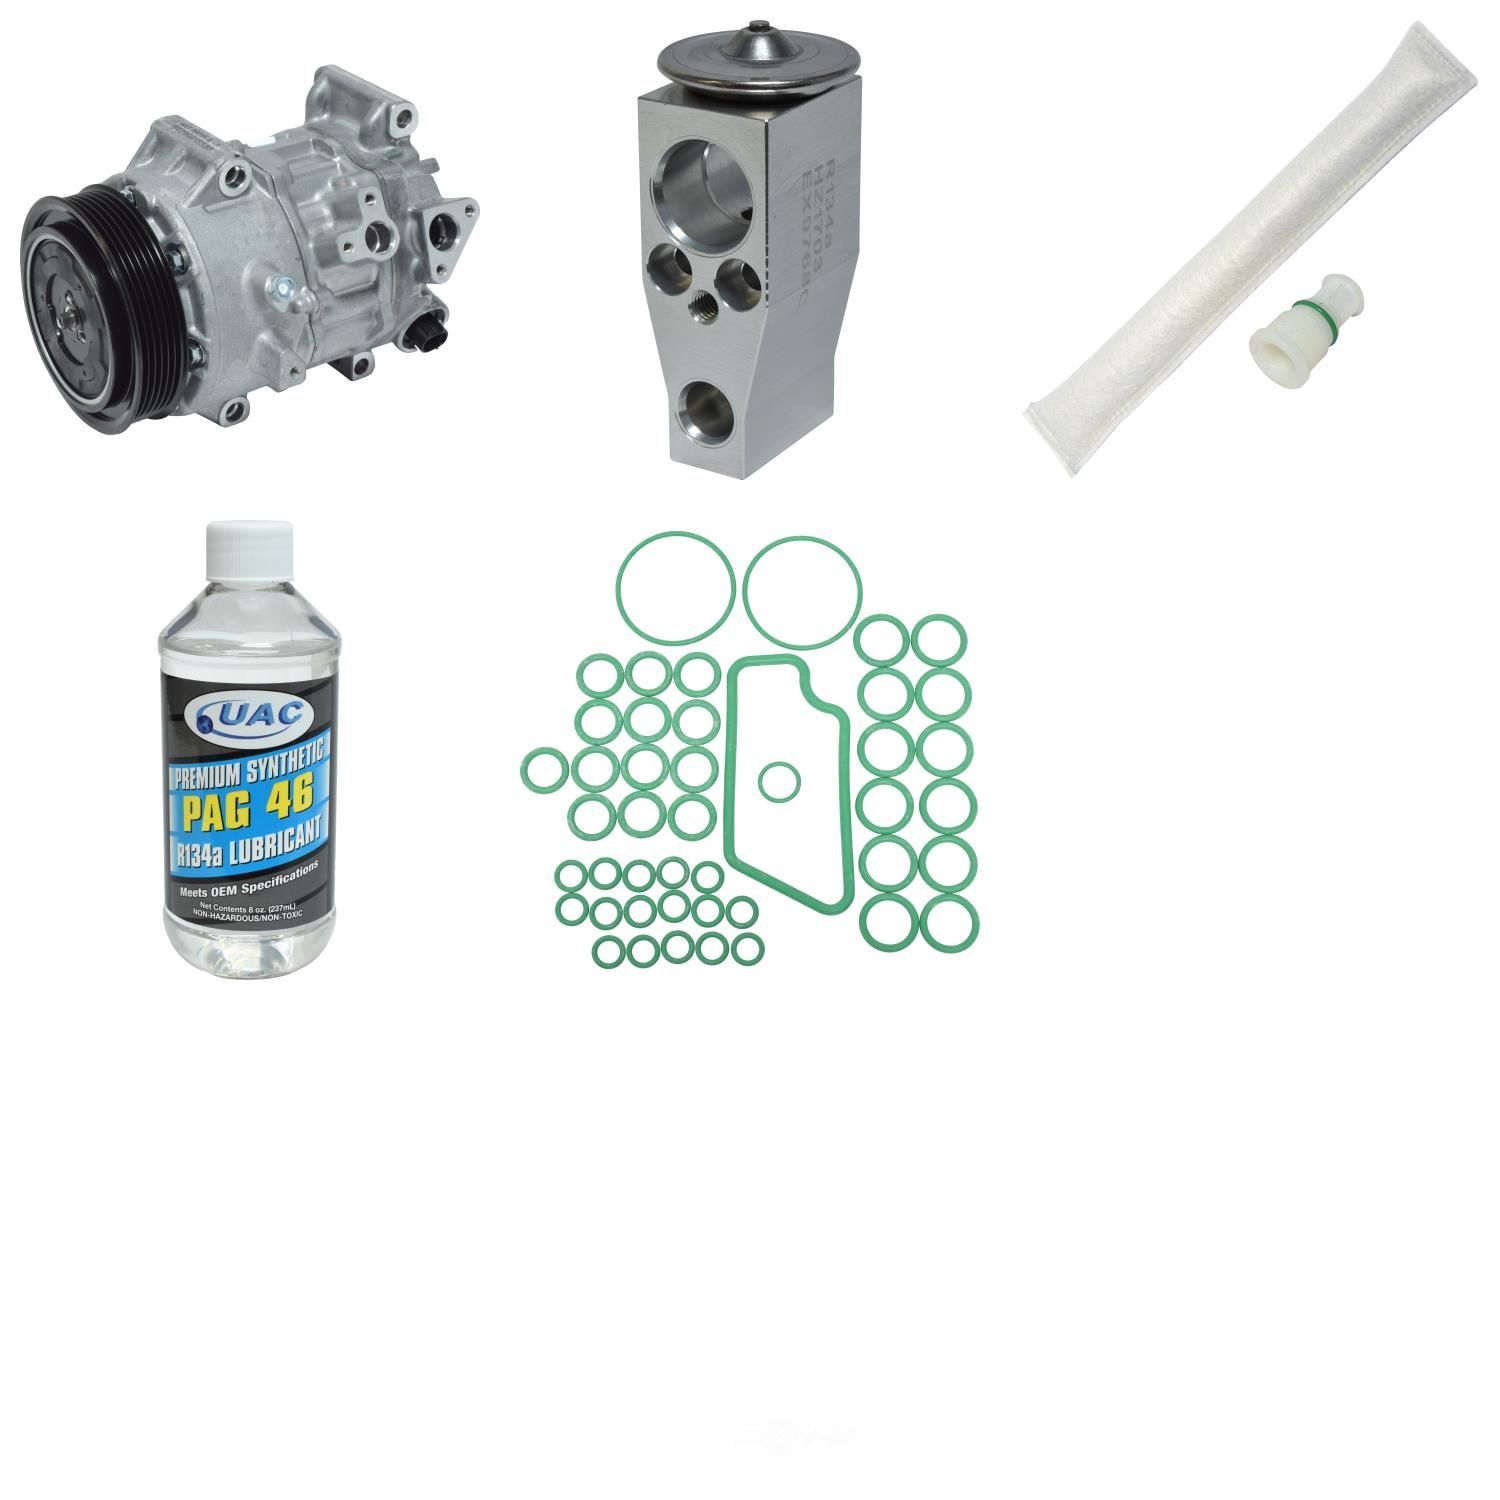 UNIVERSAL AIR CONDITIONER, INC. - Compressor Replacement Kit - UAC KT 5560